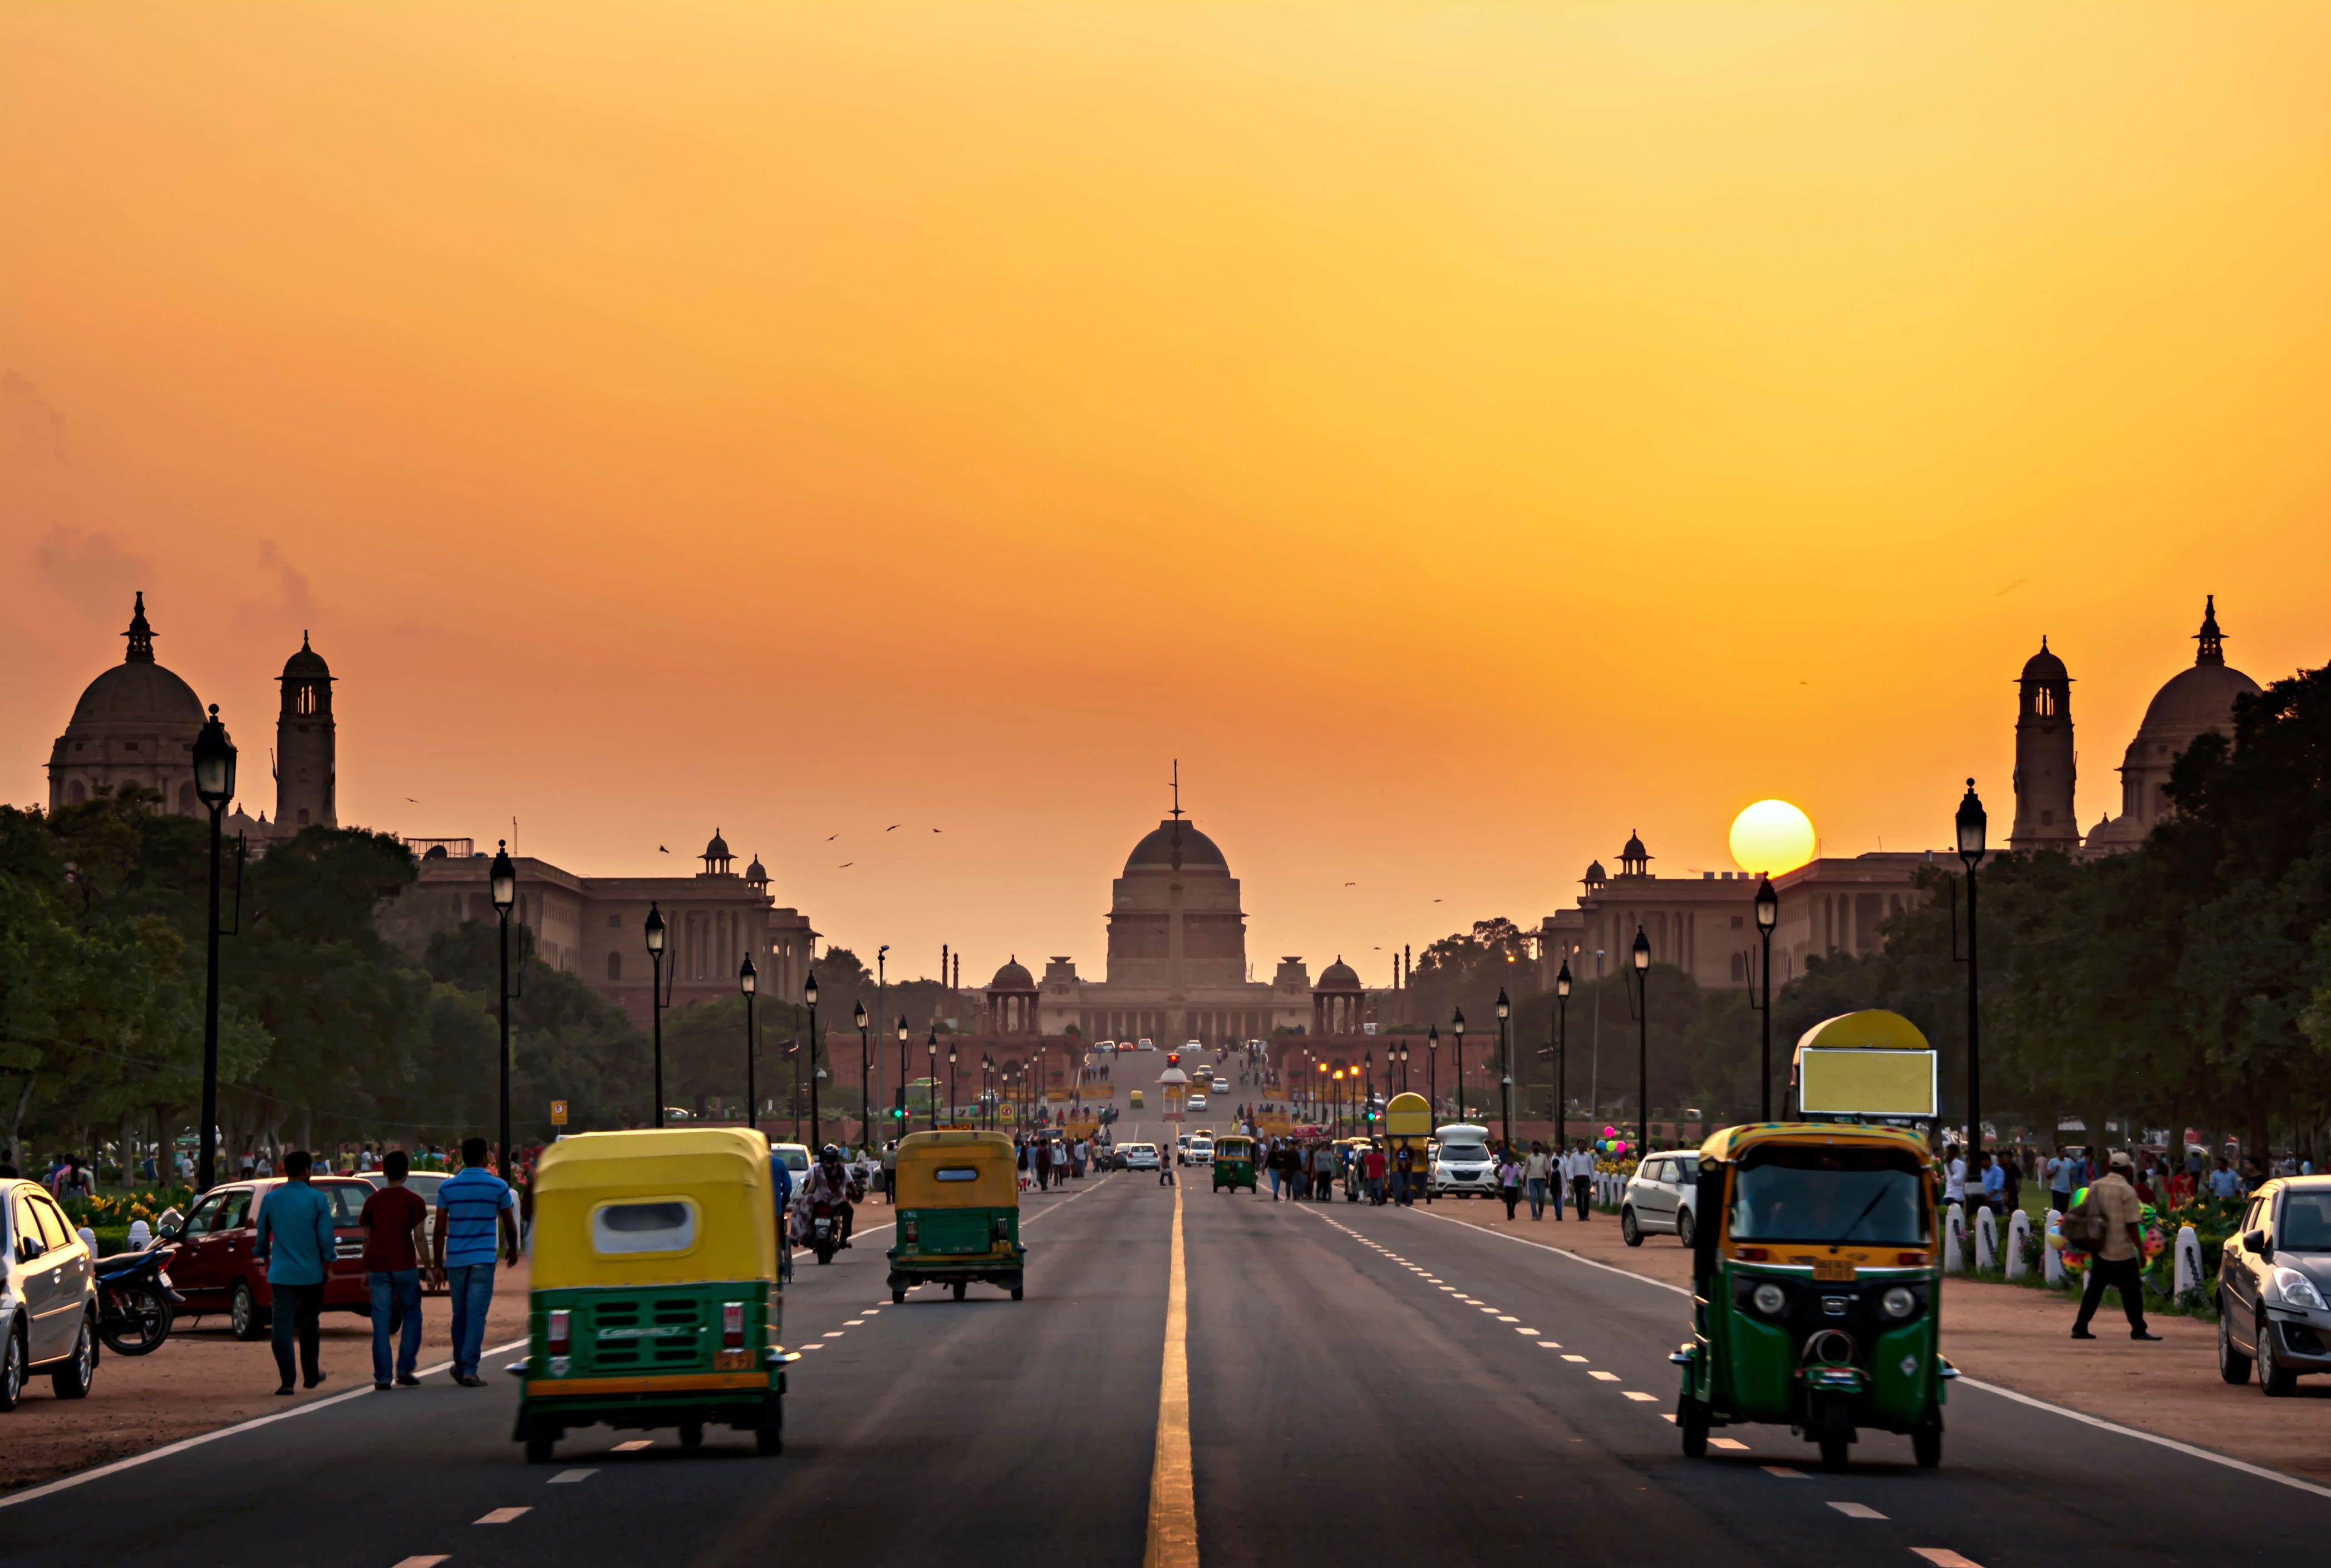 <p>The <a href="https://www.cntraveler.com/story/where-to-shop-in-delhi-and-jaipur-india?mbid=synd_msn_rss&utm_source=msn&utm_medium=syndication">Delhi</a> Metro is a beacon of cleanliness and a model of safety and efficiency. India’s largest mass rapid transit system connects the country’s capital to adjoining satellite cities with a total of 12 color-coded Metro lines and 288 stations (an additional 45 new stations expected by 2026). The Delhi Metro was also the world’s <a href="https://www.bbc.com/news/world-south-asia-15056512">first transit system</a> to receive UN carbon credits for reducing greenhouse gas emissions and today gets 35% of its power from renewable sources.</p> <p>Trains run every 2-5 minutes during peak hours (and every 10 minutes during off-peak). With clean bathrooms and elevators at every station, the Delhi Metro is ahead of many in providing a transportation system that affords independent access with dignity for all.</p> <p>To help prioritize a safe environment, the Delhi Metro introduced women-only carriages in 2010 that are now available on each train.</p> <p>The trains and stations are all air-conditioned, making Delhi's metro a fast and comfortable way to traverse the vast city that’s often hot and humid. Fares are calculated based on distance and start at just $0.12.</p> <p><strong>How to experience it:</strong> Relax in Delhi on the Yellow Line: explore the <a href="https://delhitourism.gov.in/delhitourism/tourist_place/garden_of_five_senses.jsp">Garden of the Five Senses</a> (Saket Station) or <a href="https://www.delhitourism.gov.in/delhitourism/entertainment/lodhi_garden.jsp">Lodhi Gardens</a> (Jor Bagh Station).</p><p>Sign up to receive the latest news, expert tips, and inspiration on all things travel</p><a href="https://www.cntraveler.com/newsletter/the-daily?sourceCode=msnsend">Inspire Me</a>